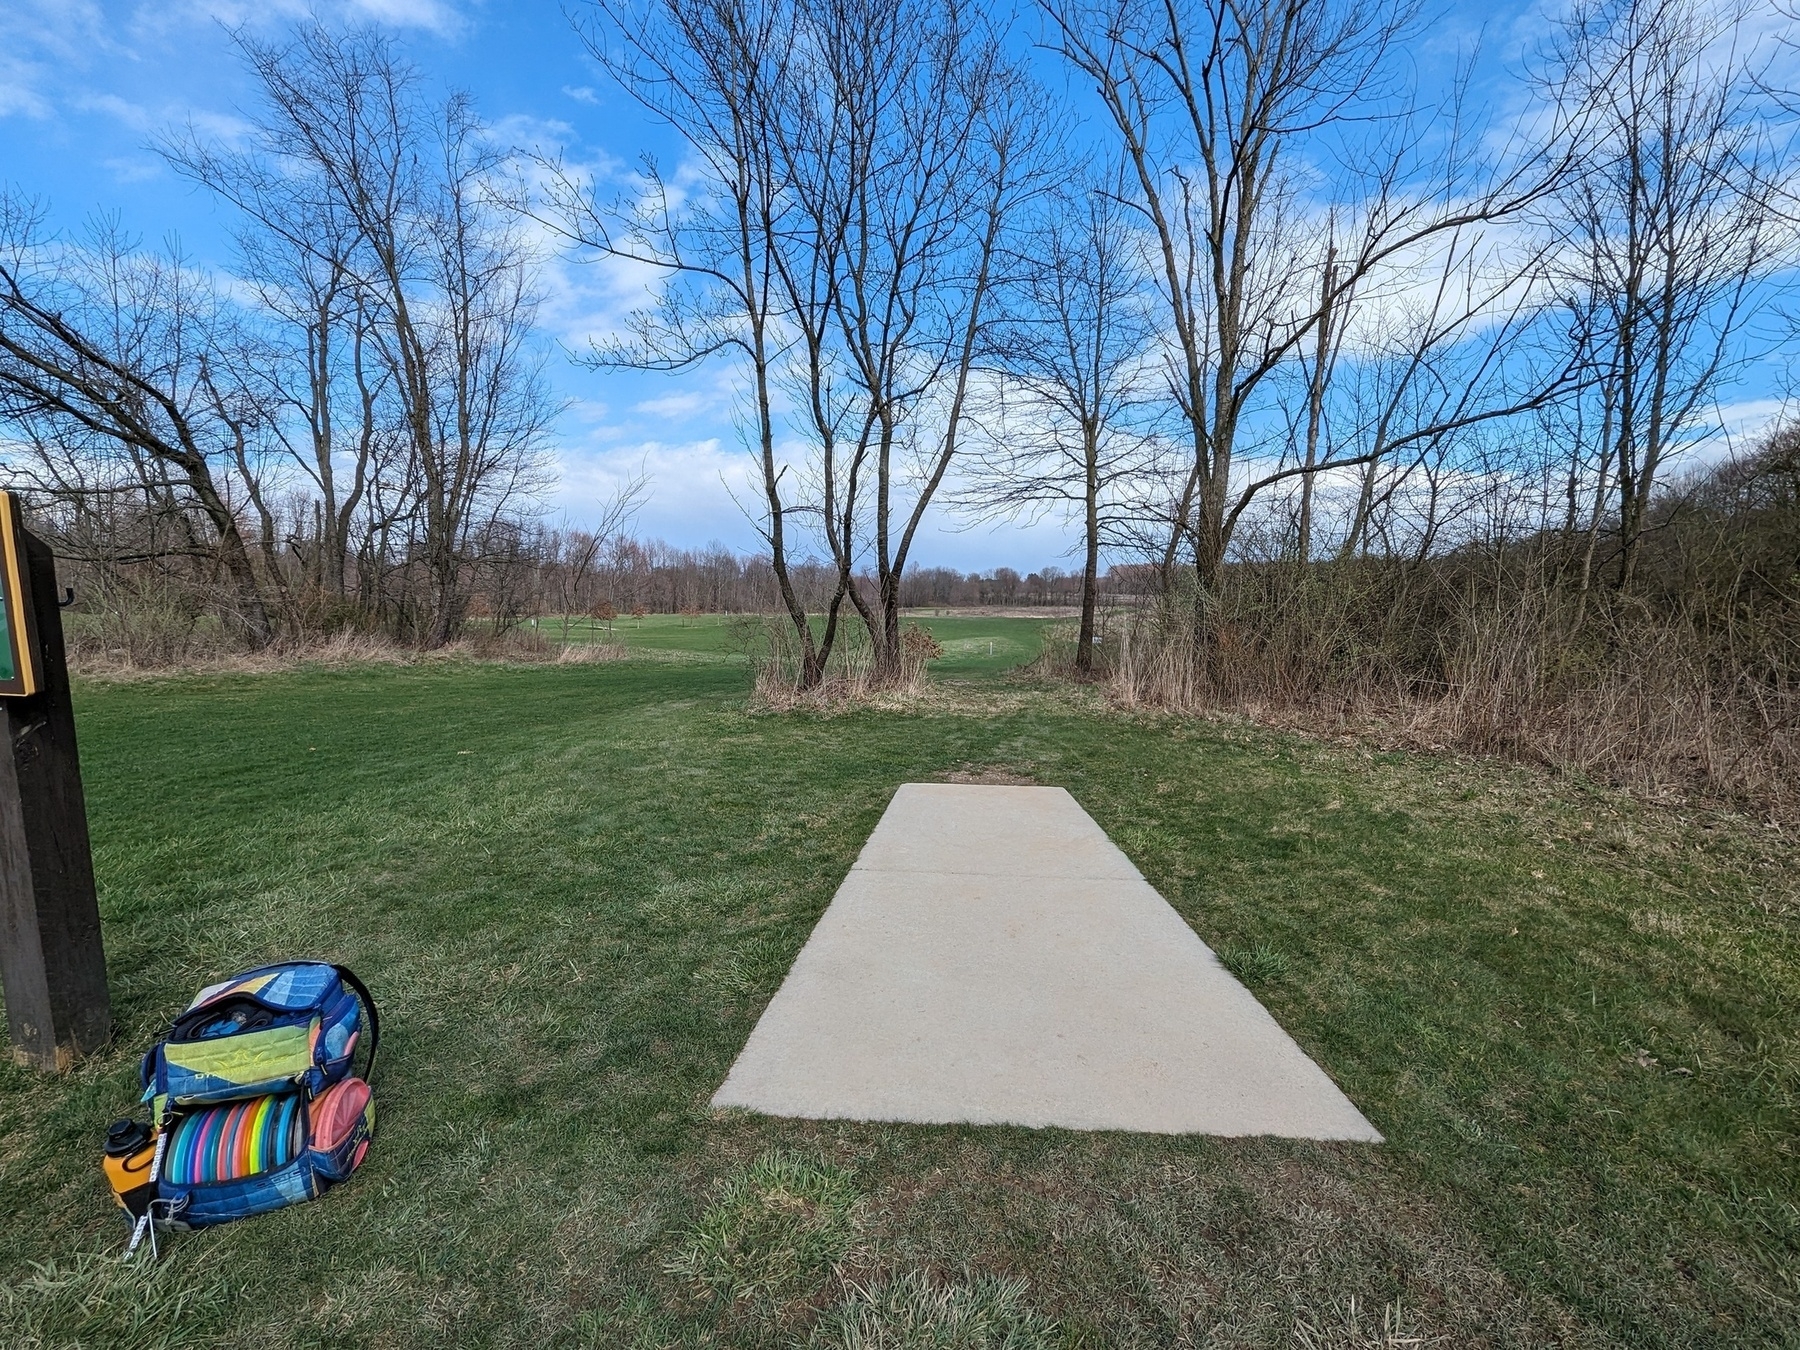 A concrete disc golf tee pad and disc golf bag in the foreground with a grass field and trees in the background.